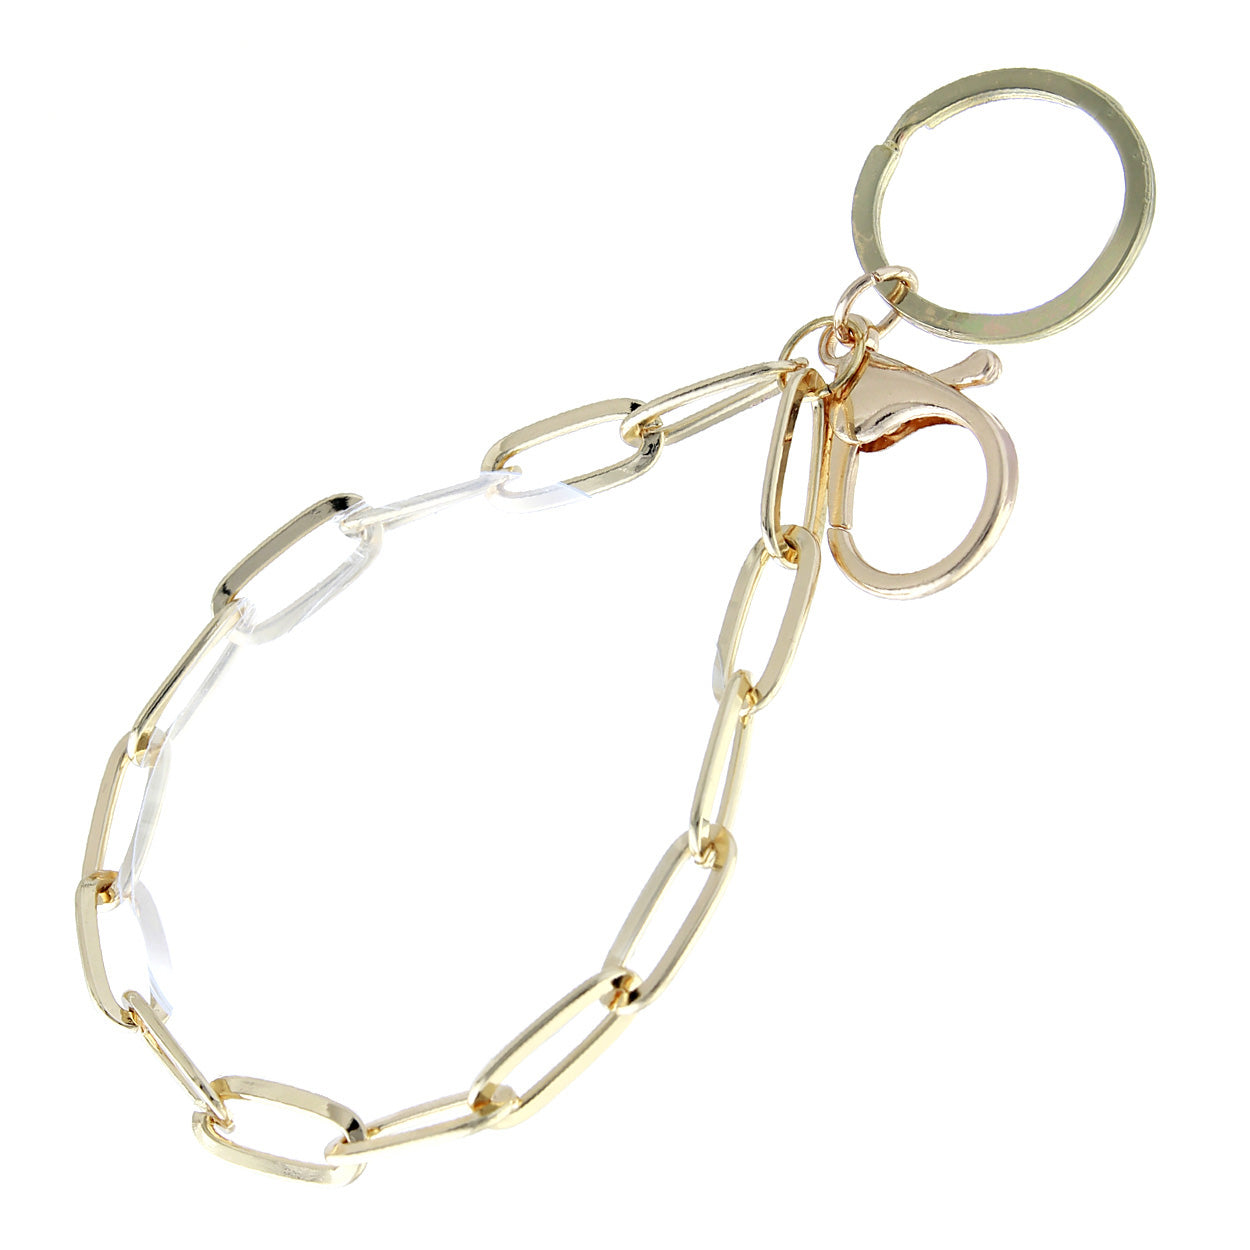 Stunning Oblong Links Chain Bracelet Key Ring Lobster Claw Clasp